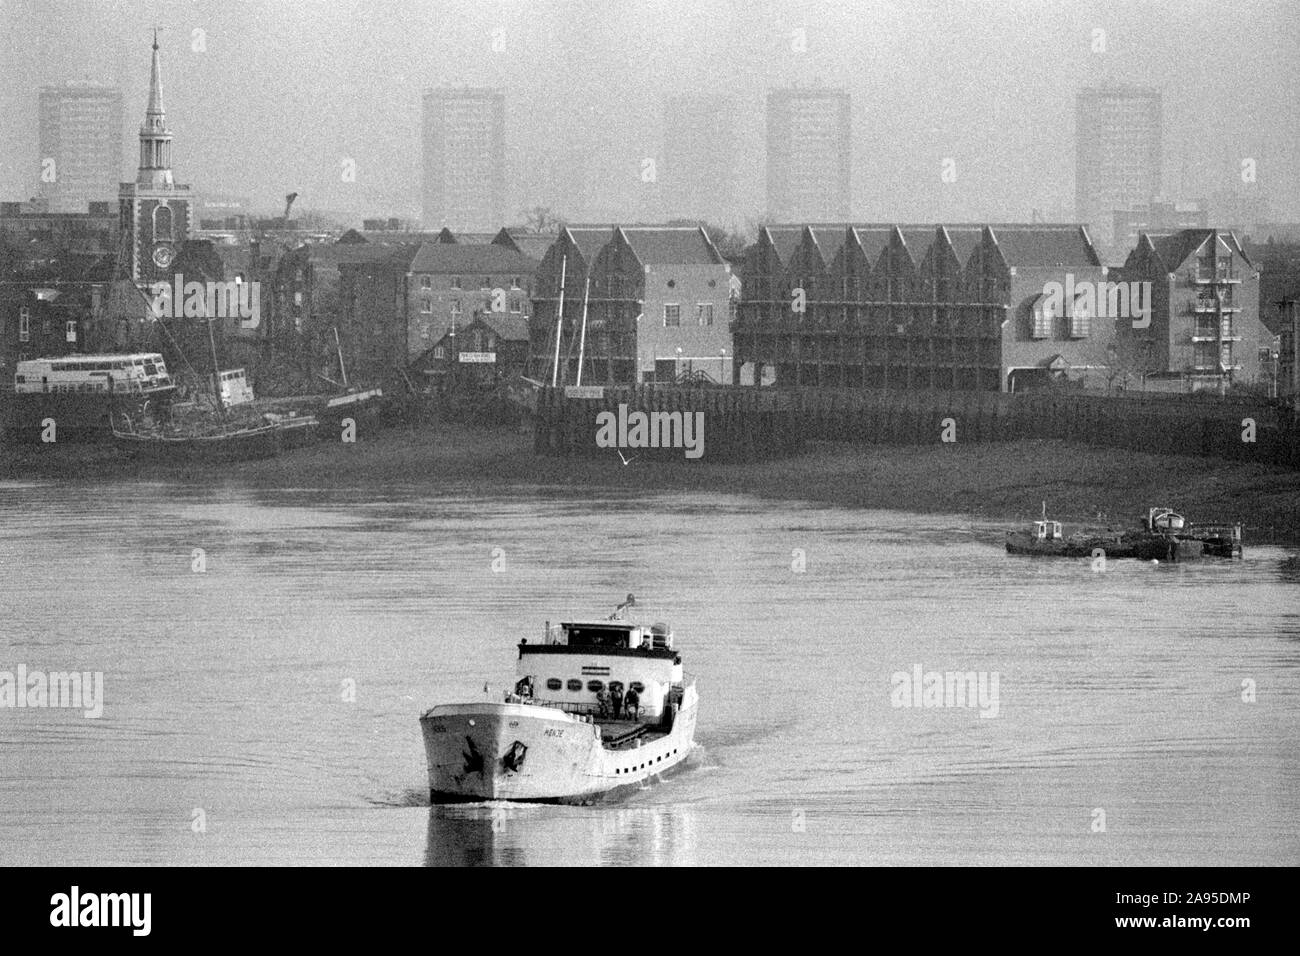 London Docklands Development 1980s UK. View across River Thames towards Rotherhithe, St Mary's Church new flats being built.1987 England. HOMER SYKES. Stock Photo